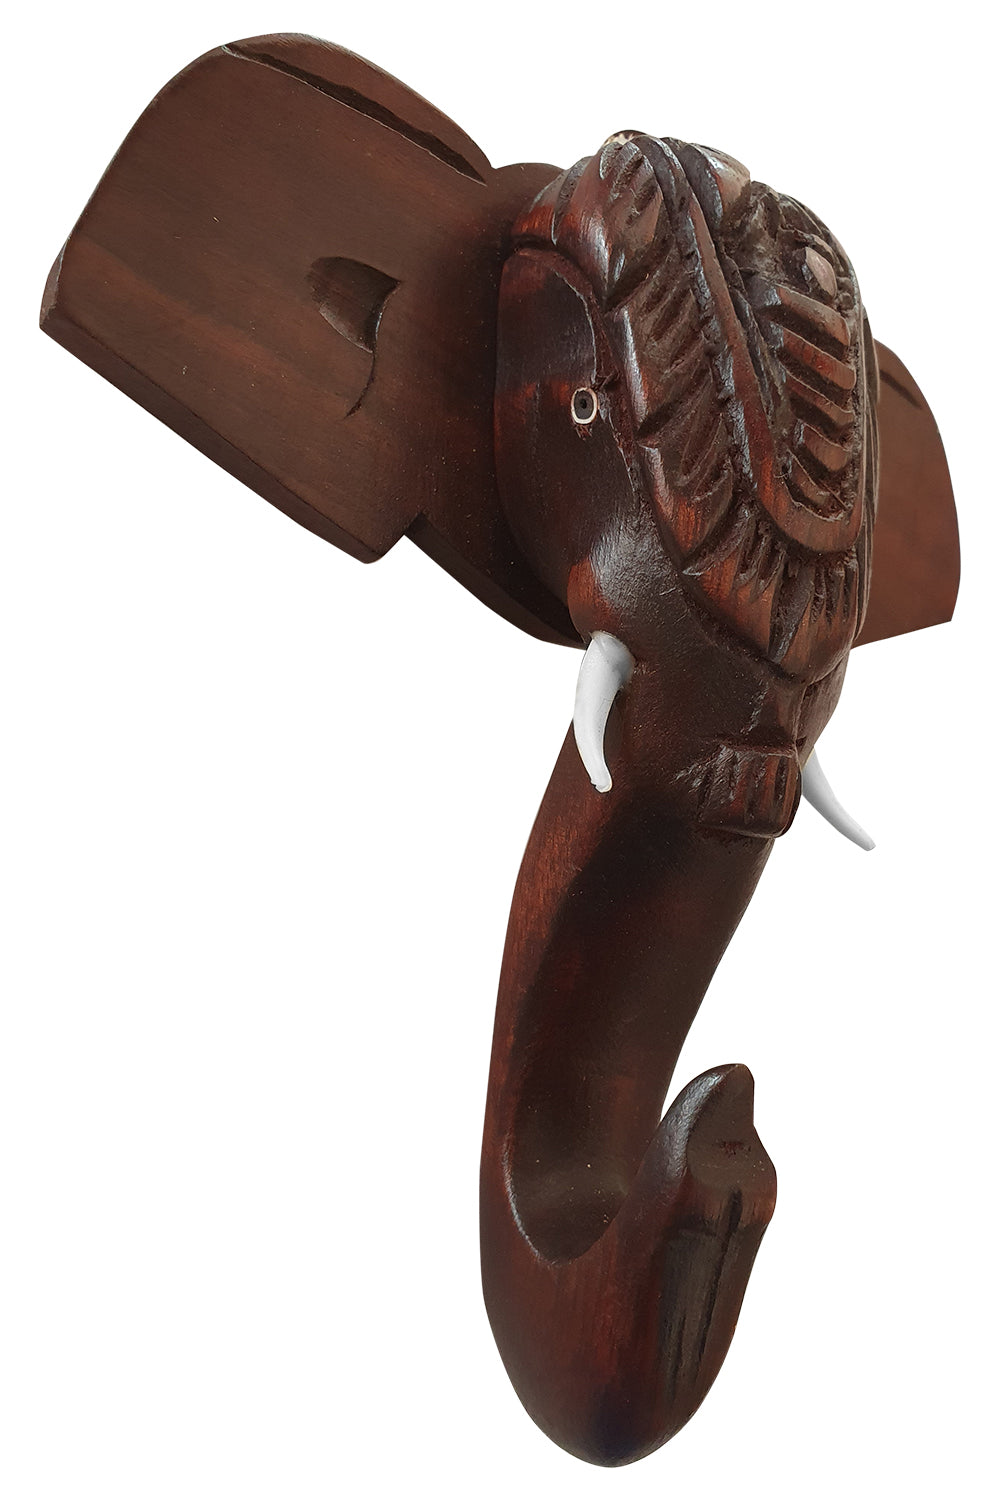 Southloom Handmade Elephant Head with Carved Patterns Handicraft (Carved from Mahogany Wood) 6 Inches